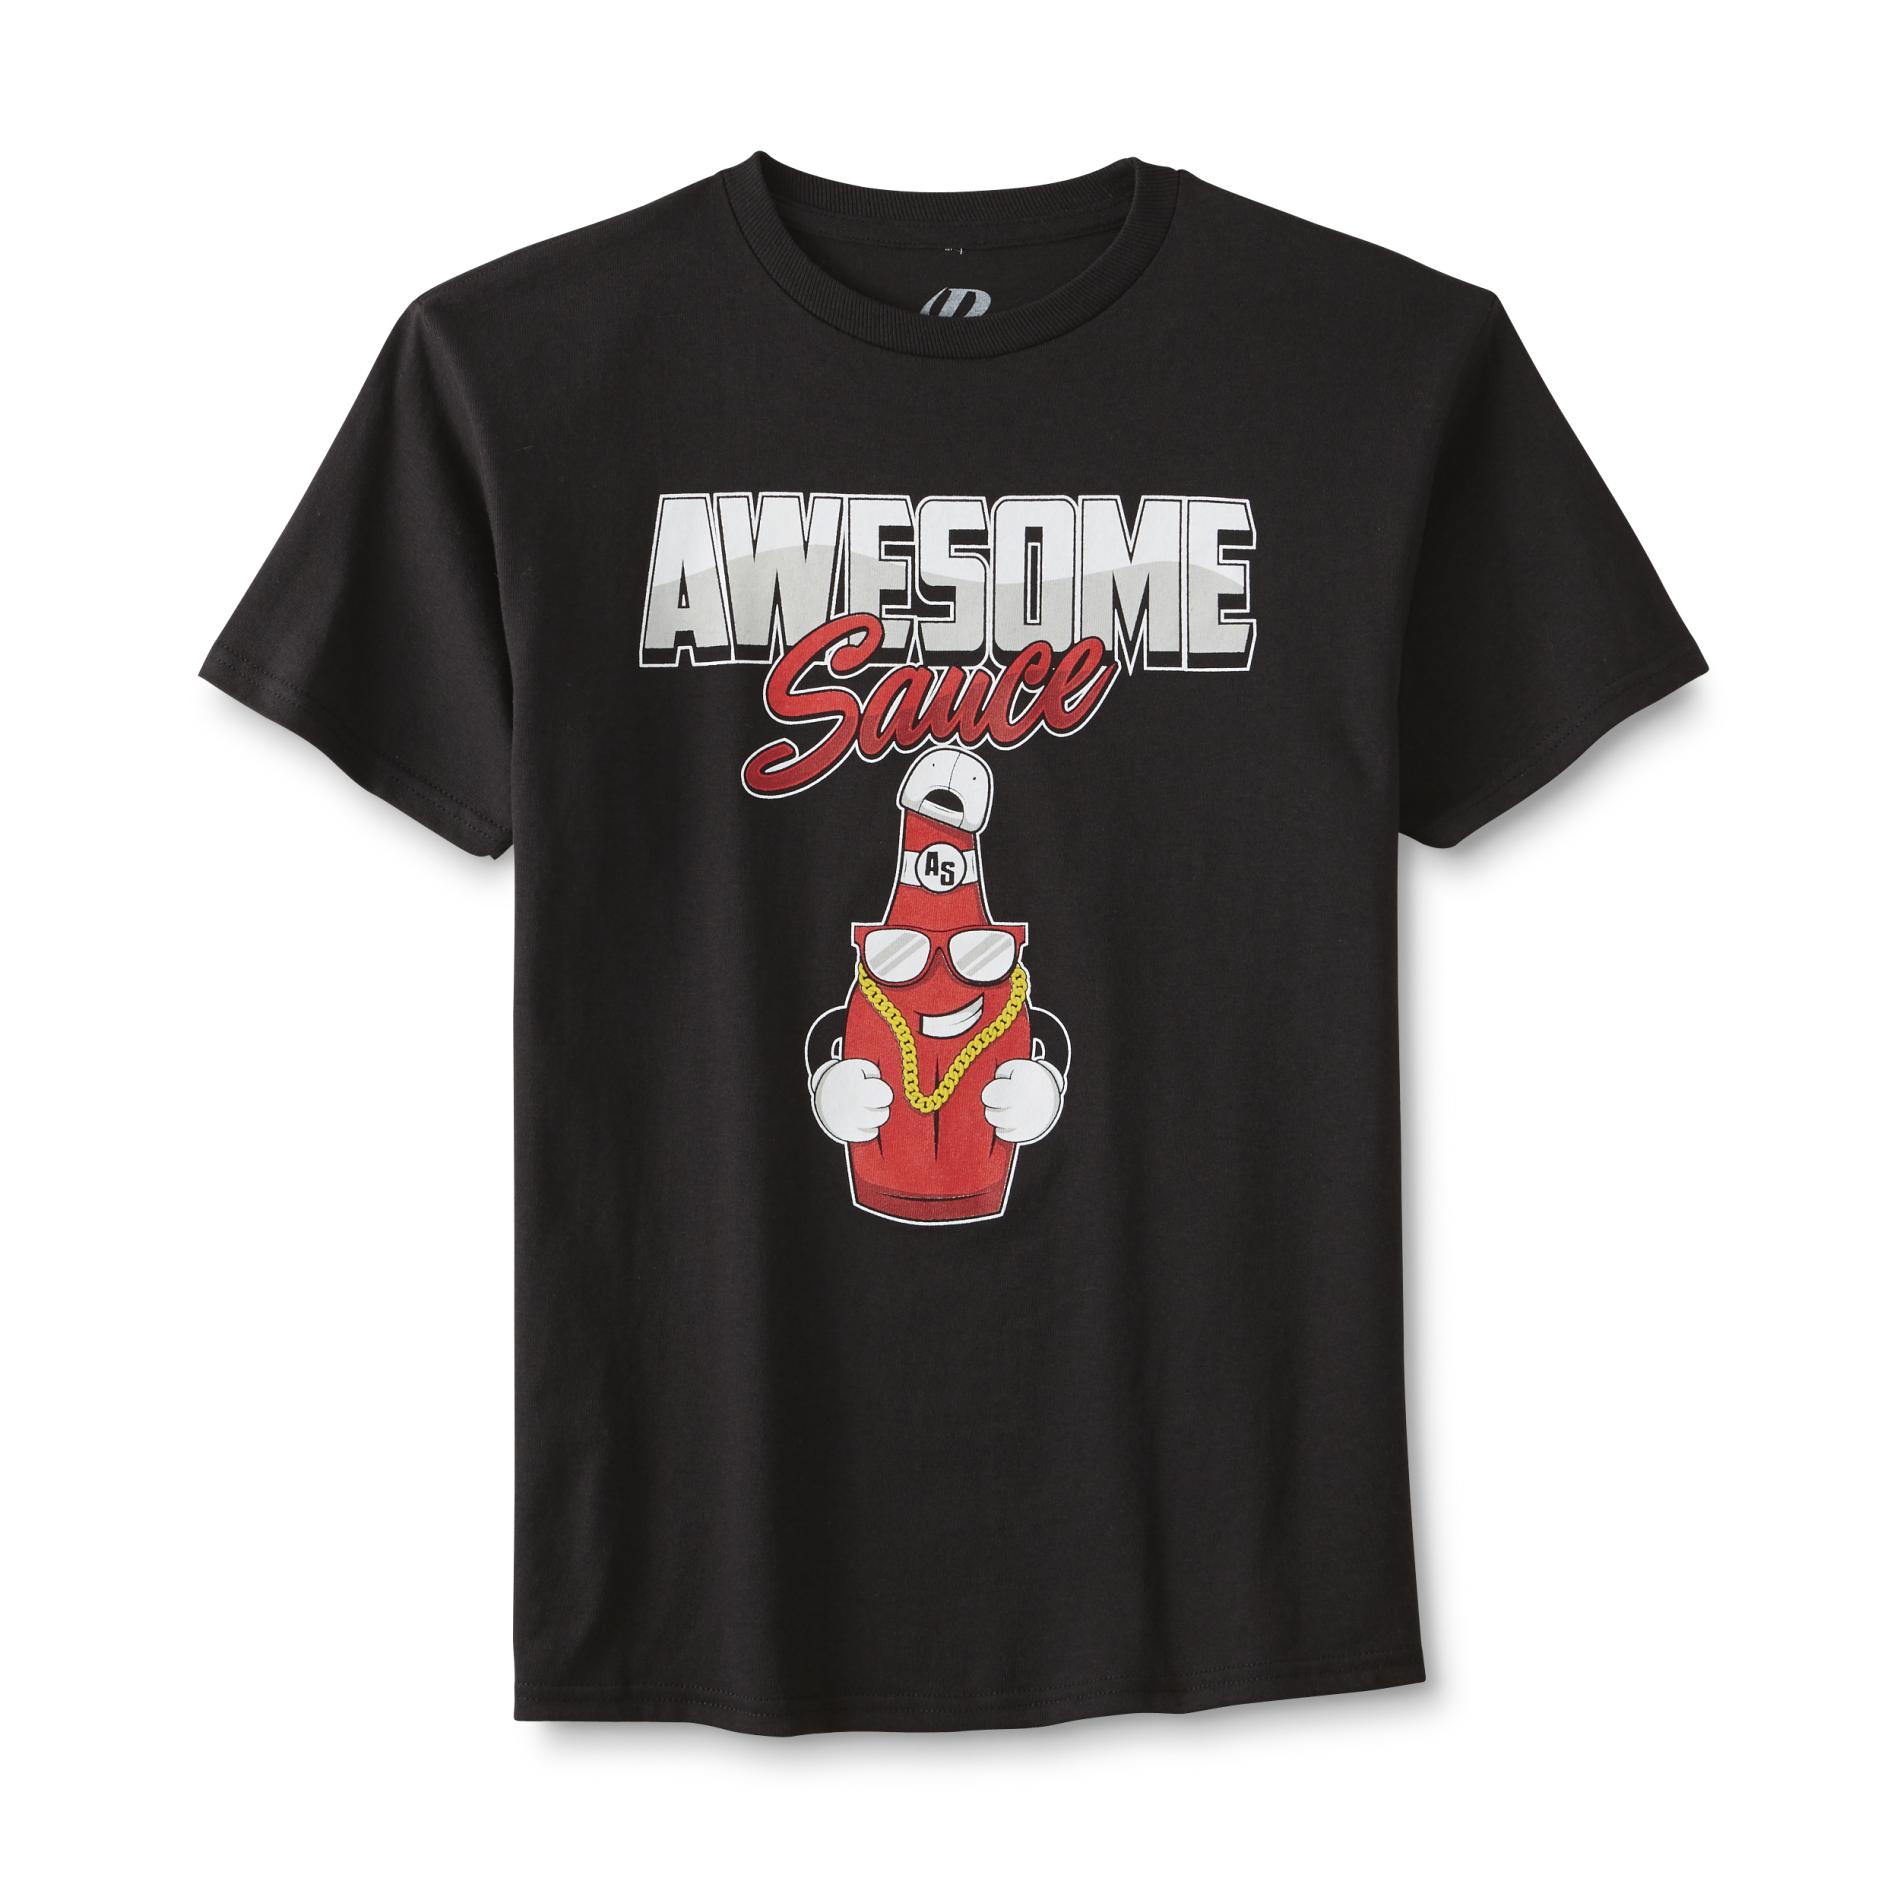 Disney Boy's Graphic T-Shirt - Awesome Sauce